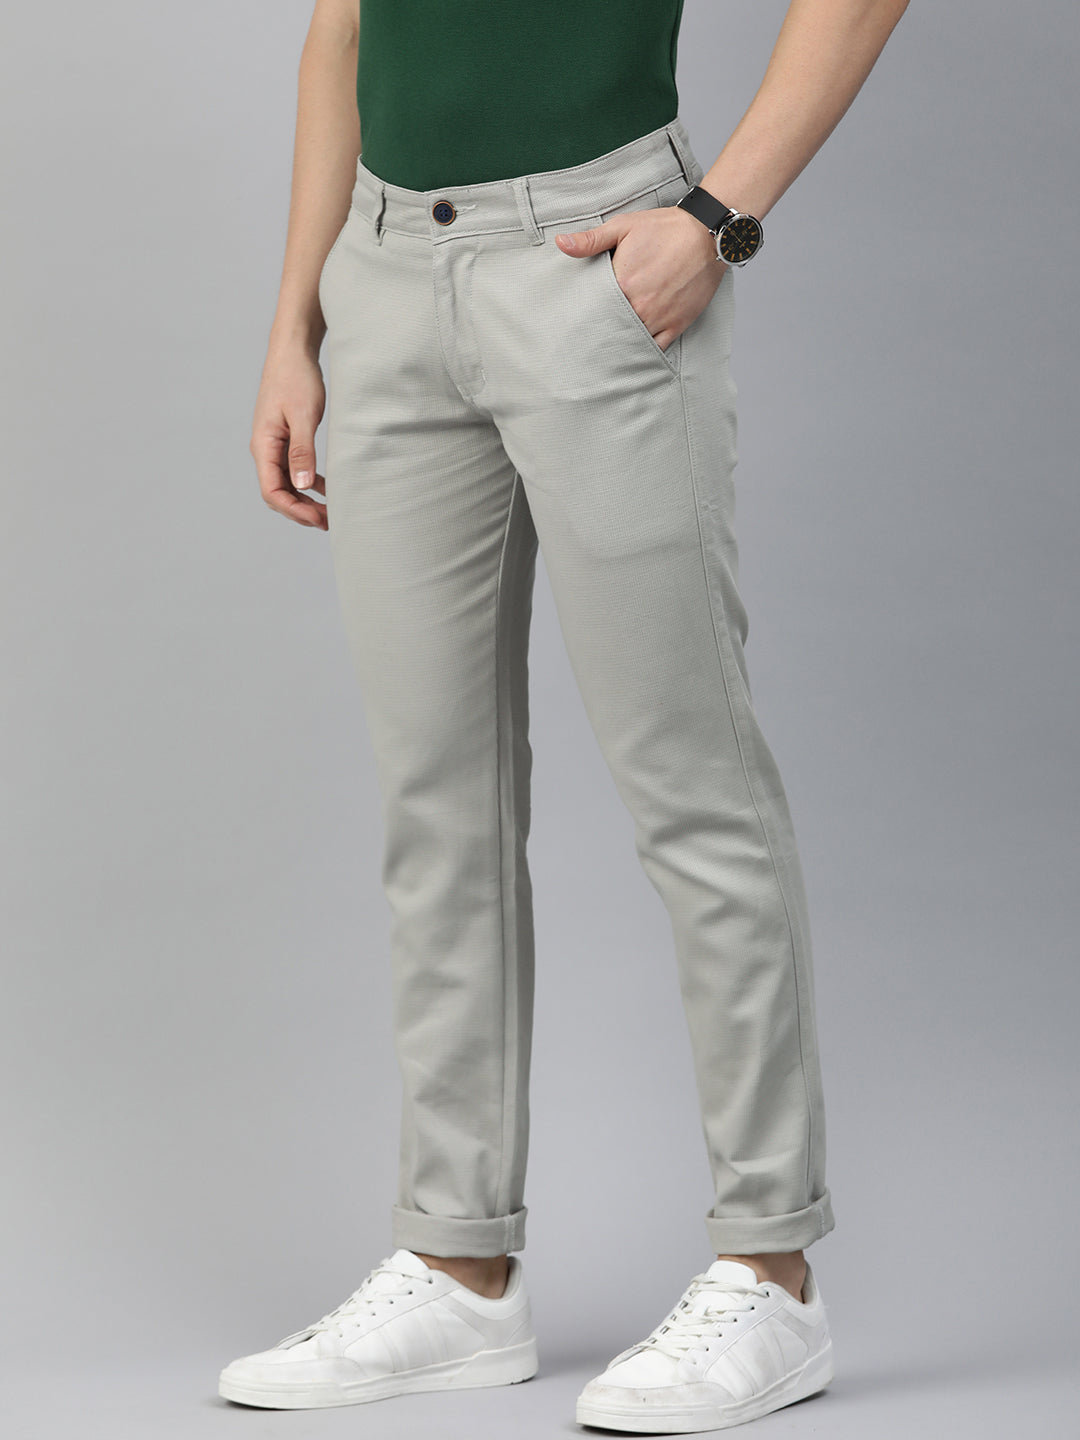 Majestic Man Casual textured Trouser - Grey